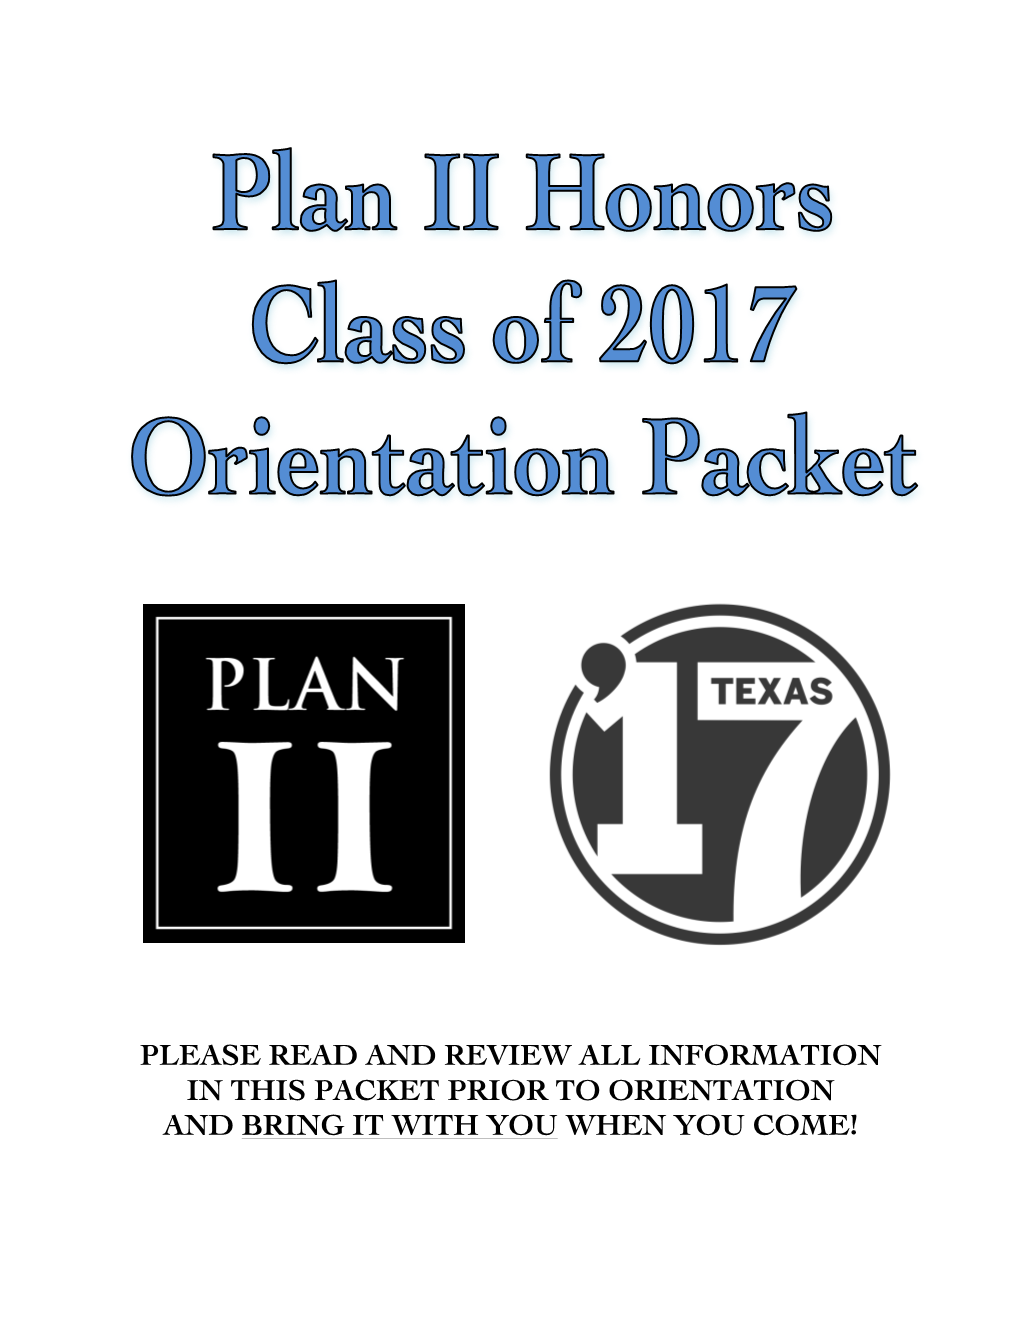 Please Read and Review All Information in This Packet Prior to Orientation and Bring It with You When You Come!